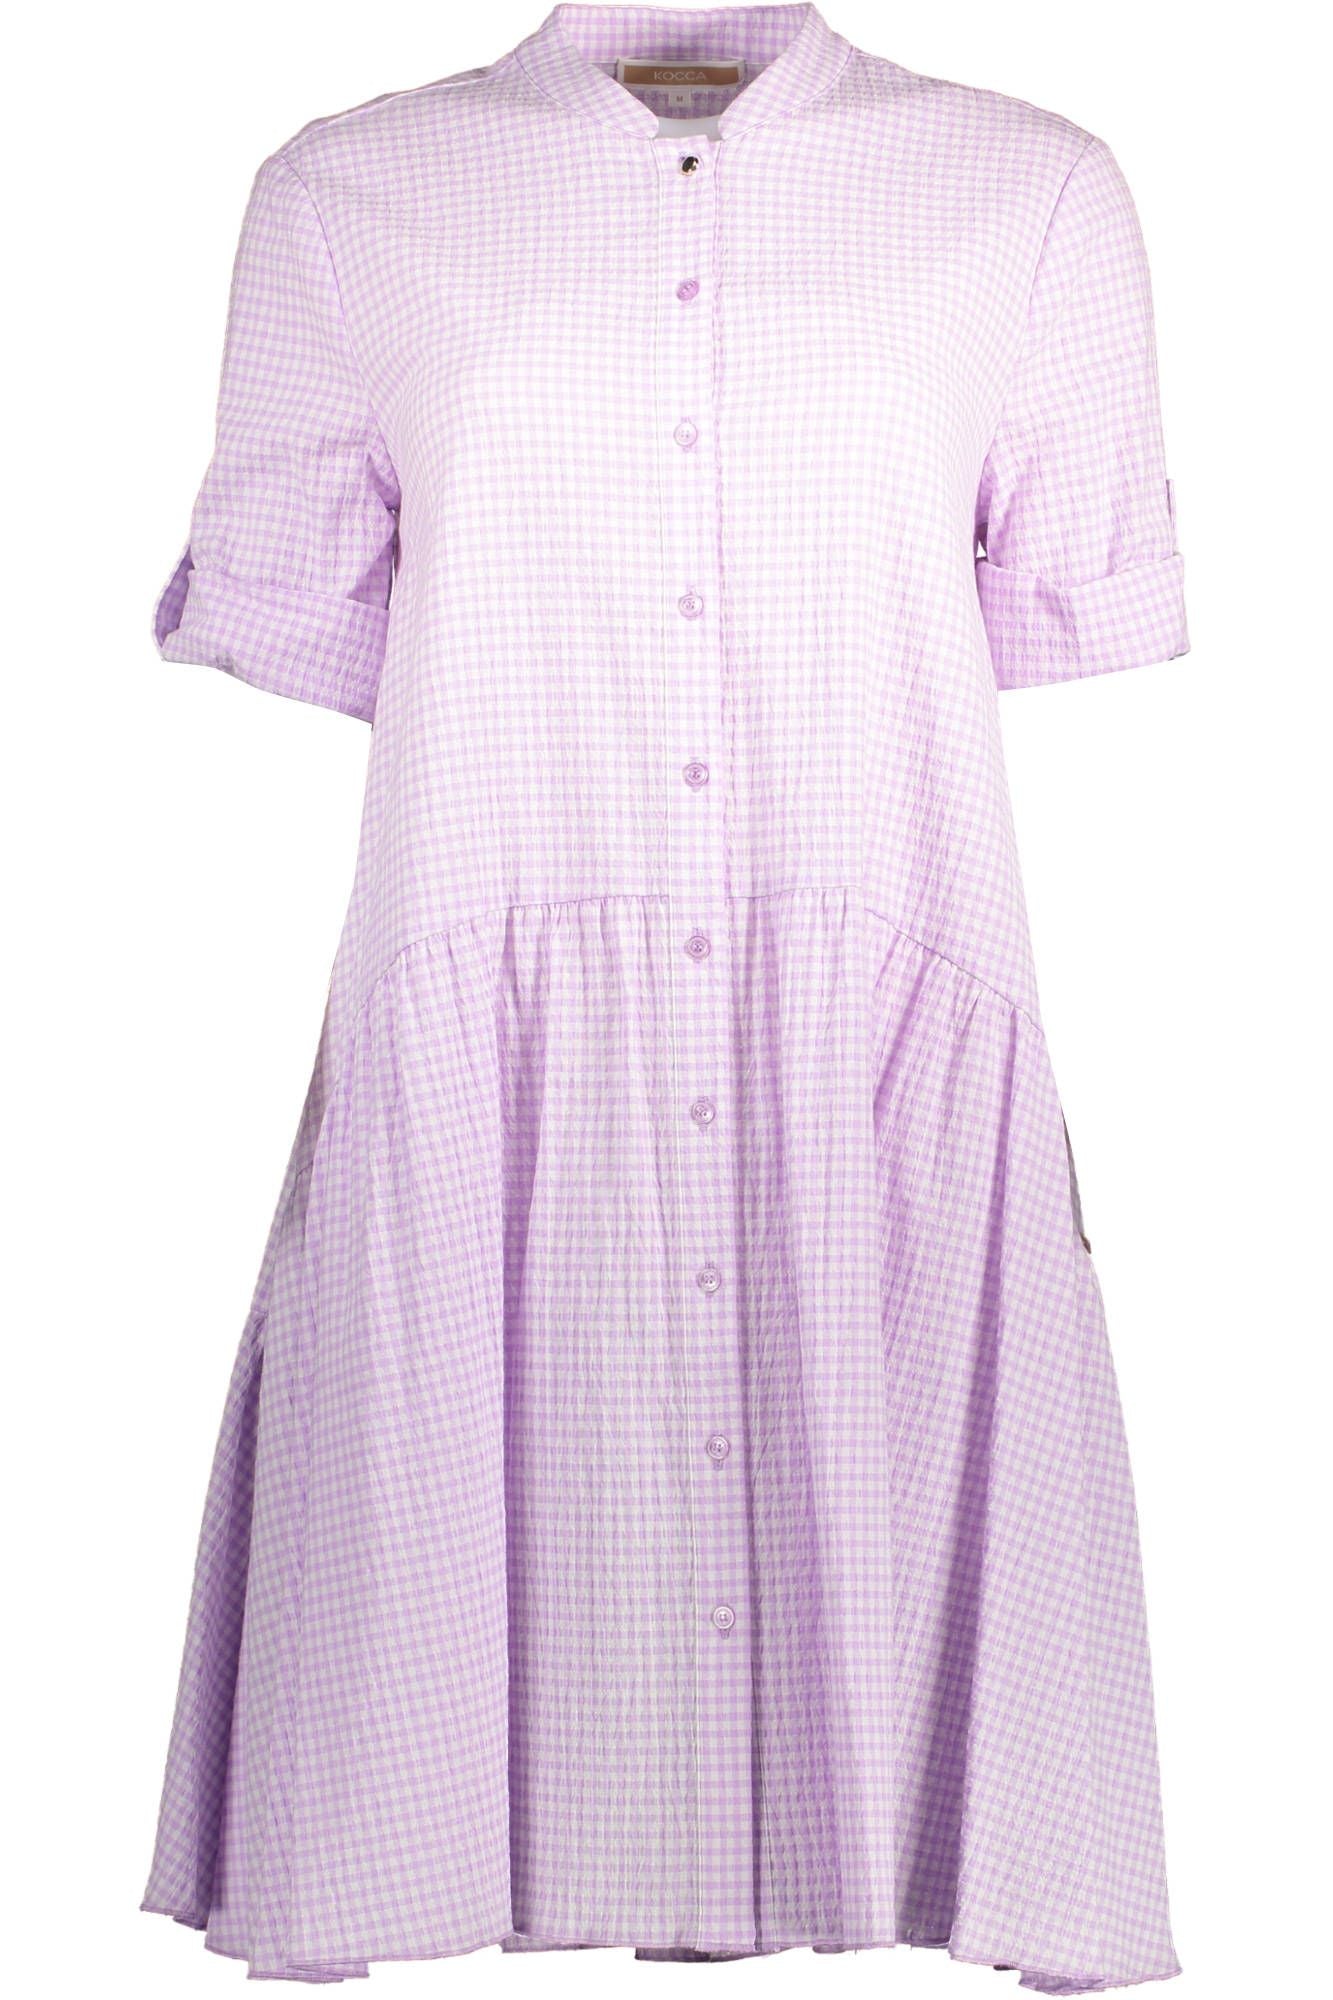 Chic Pink Cotton Dress with Versatile Sleeves